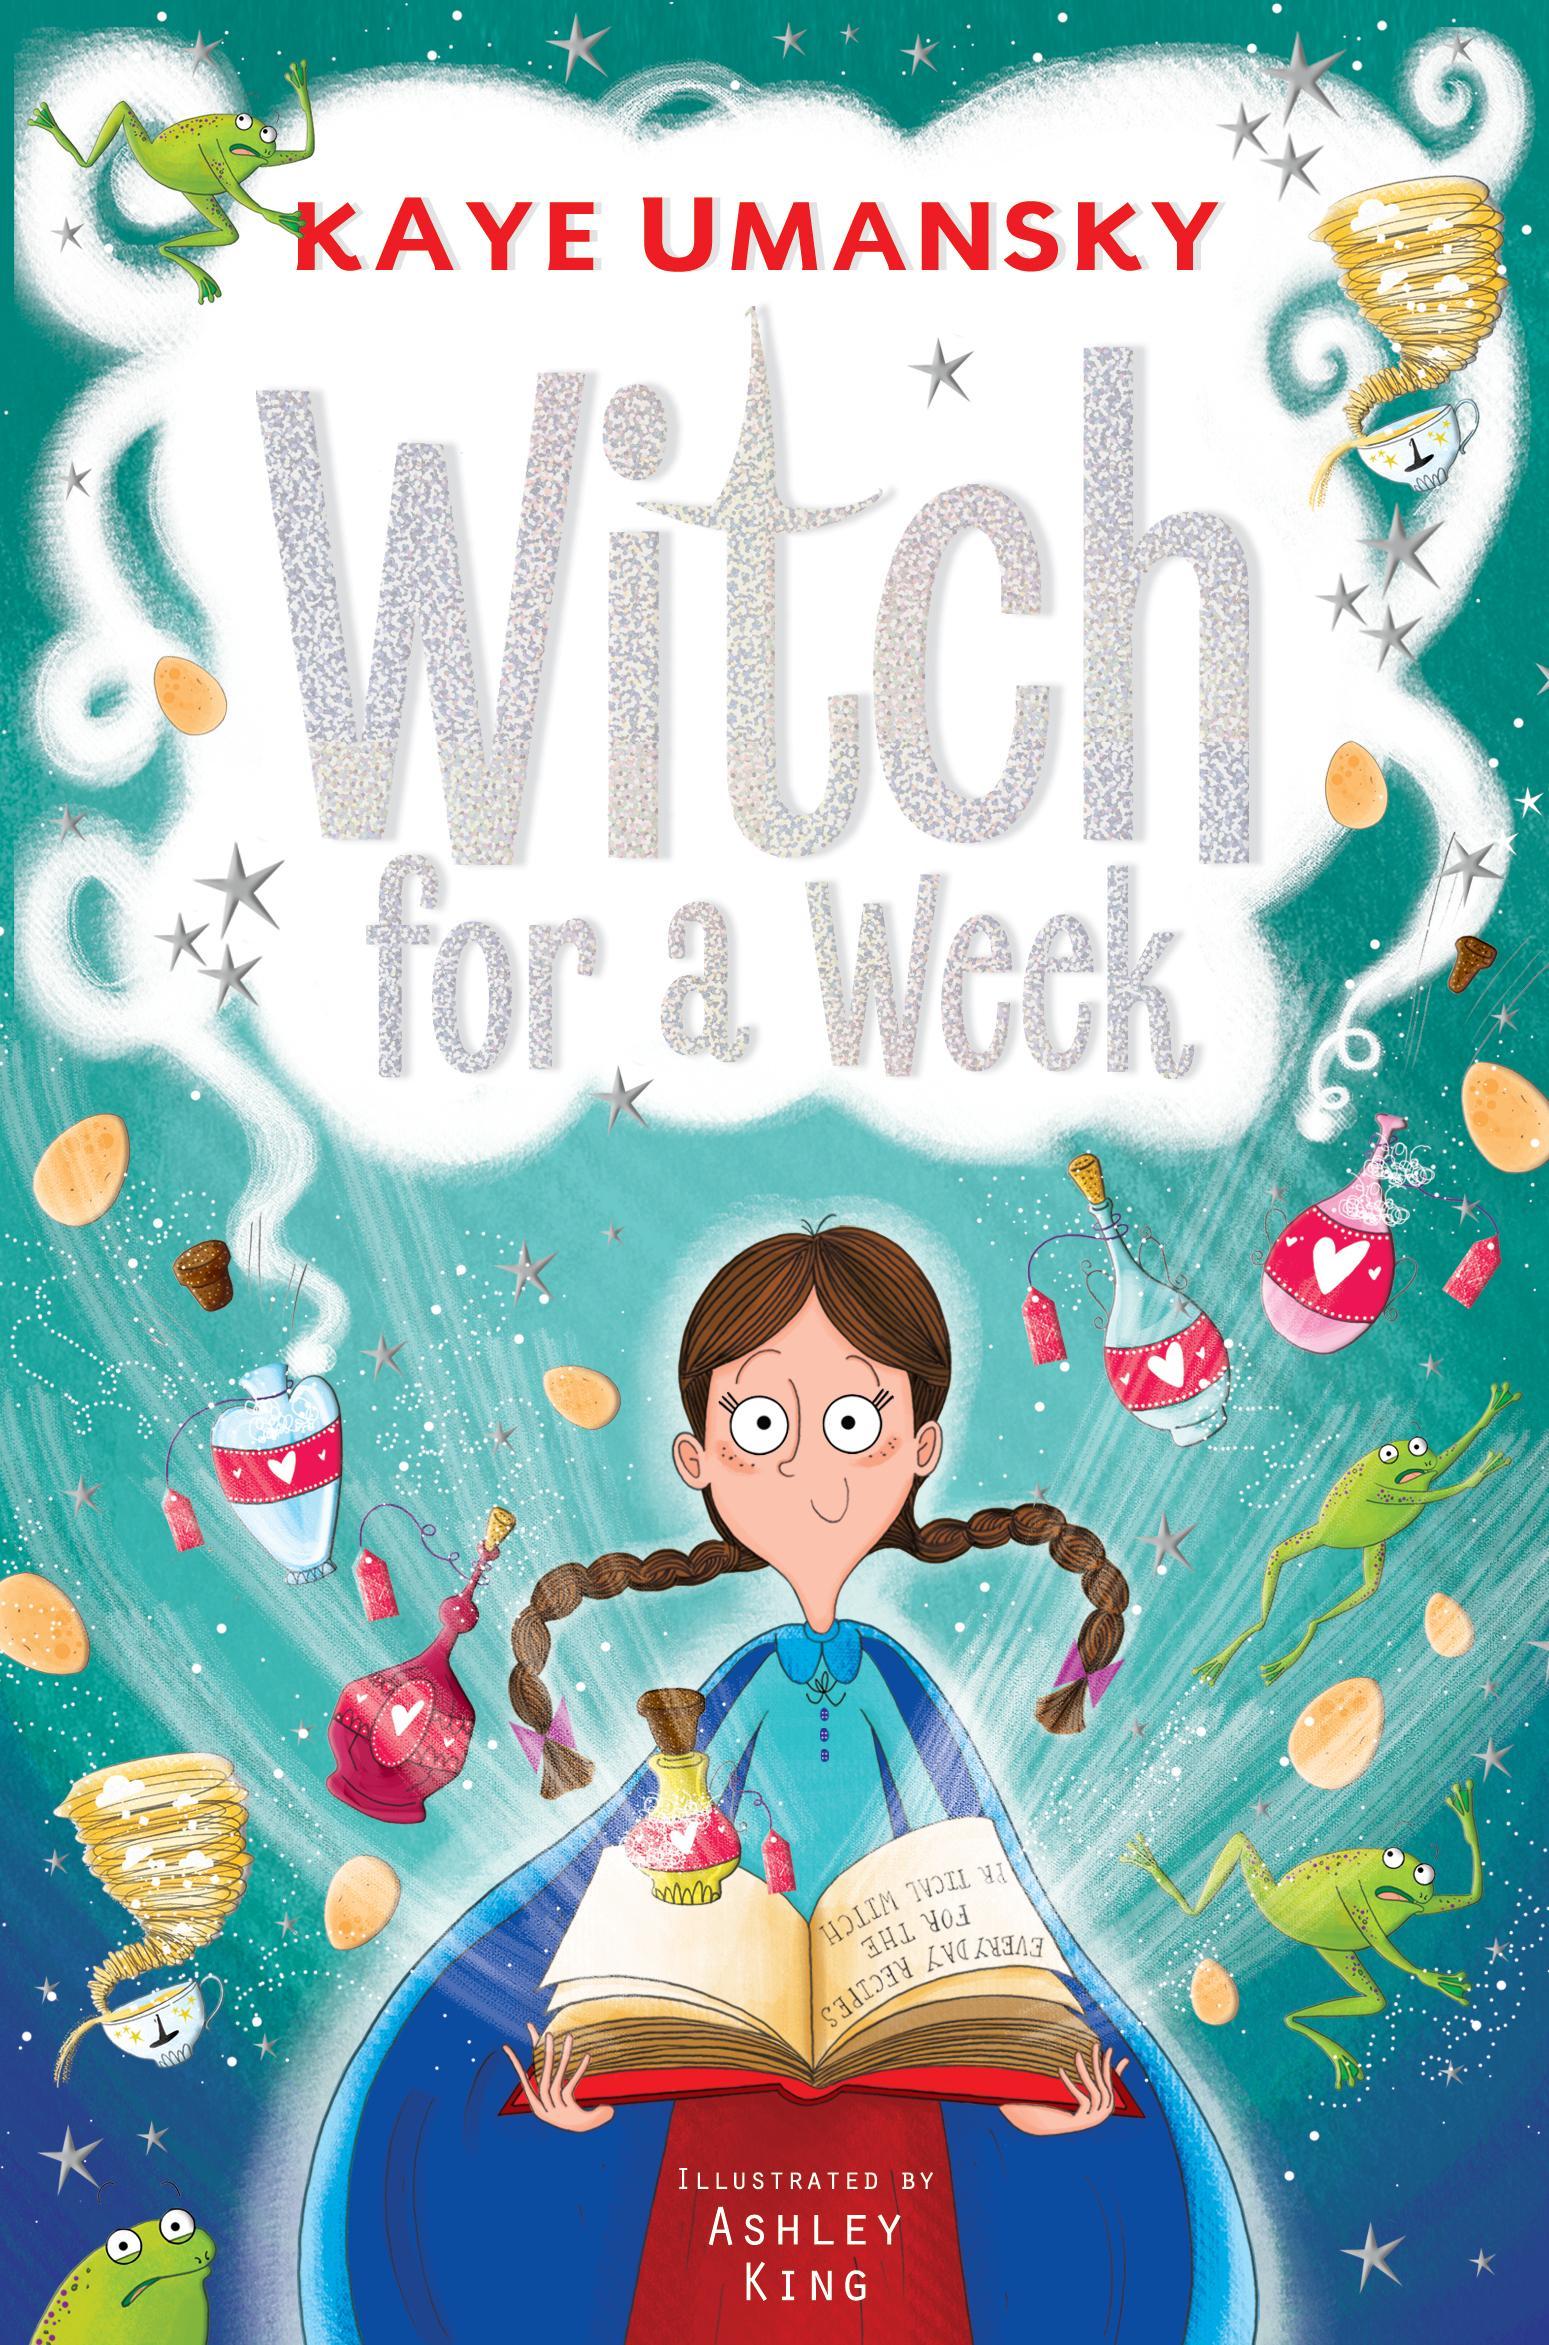 Witch for a Week